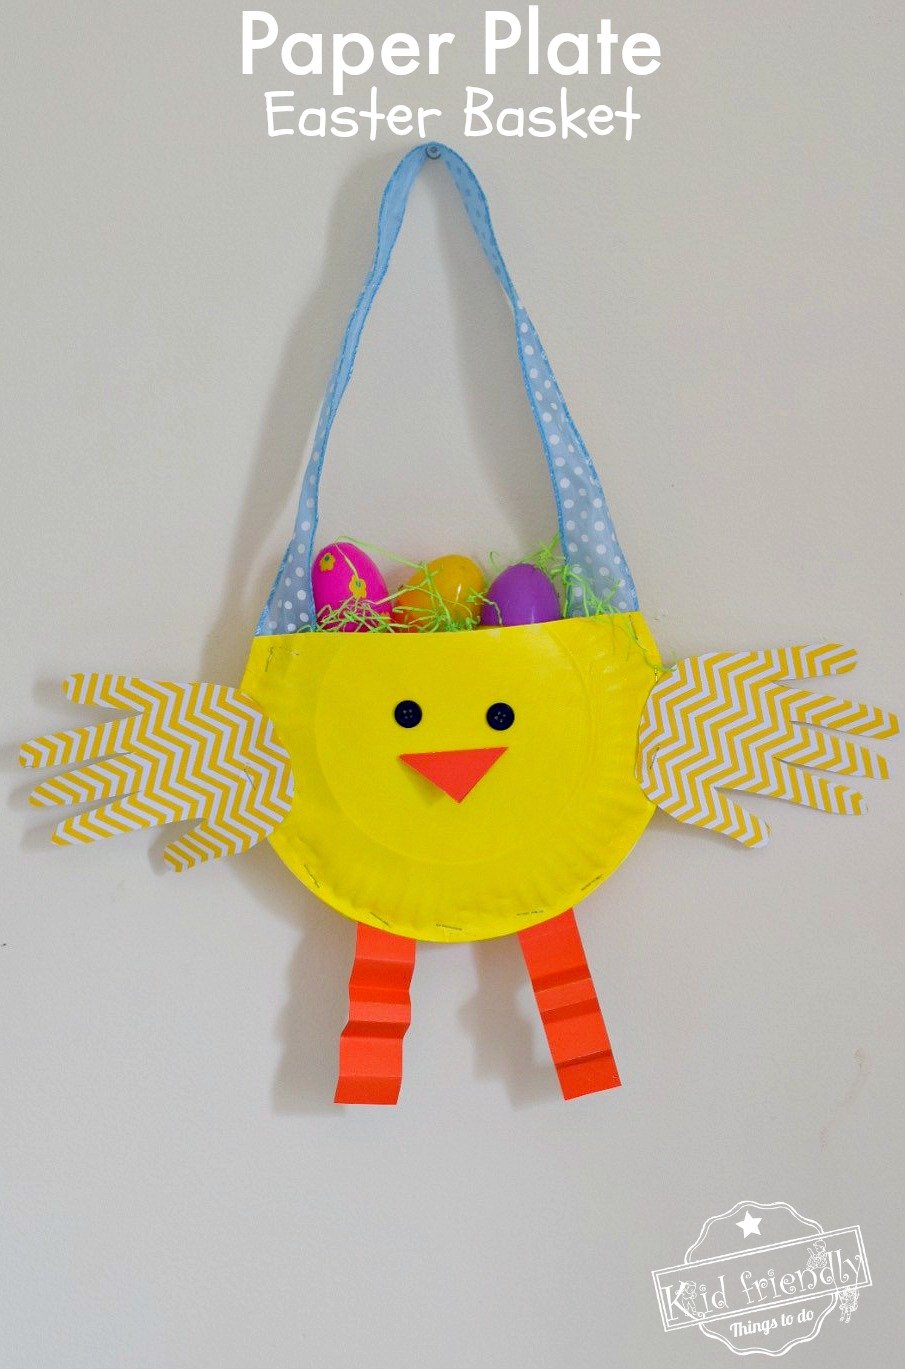 DIY Paper Plate Chicken Easter Basket Craft for Kids - Make this adorable little chicken with the kids for a fun craft and treat holder - www.kidfriendlythingstodo.com